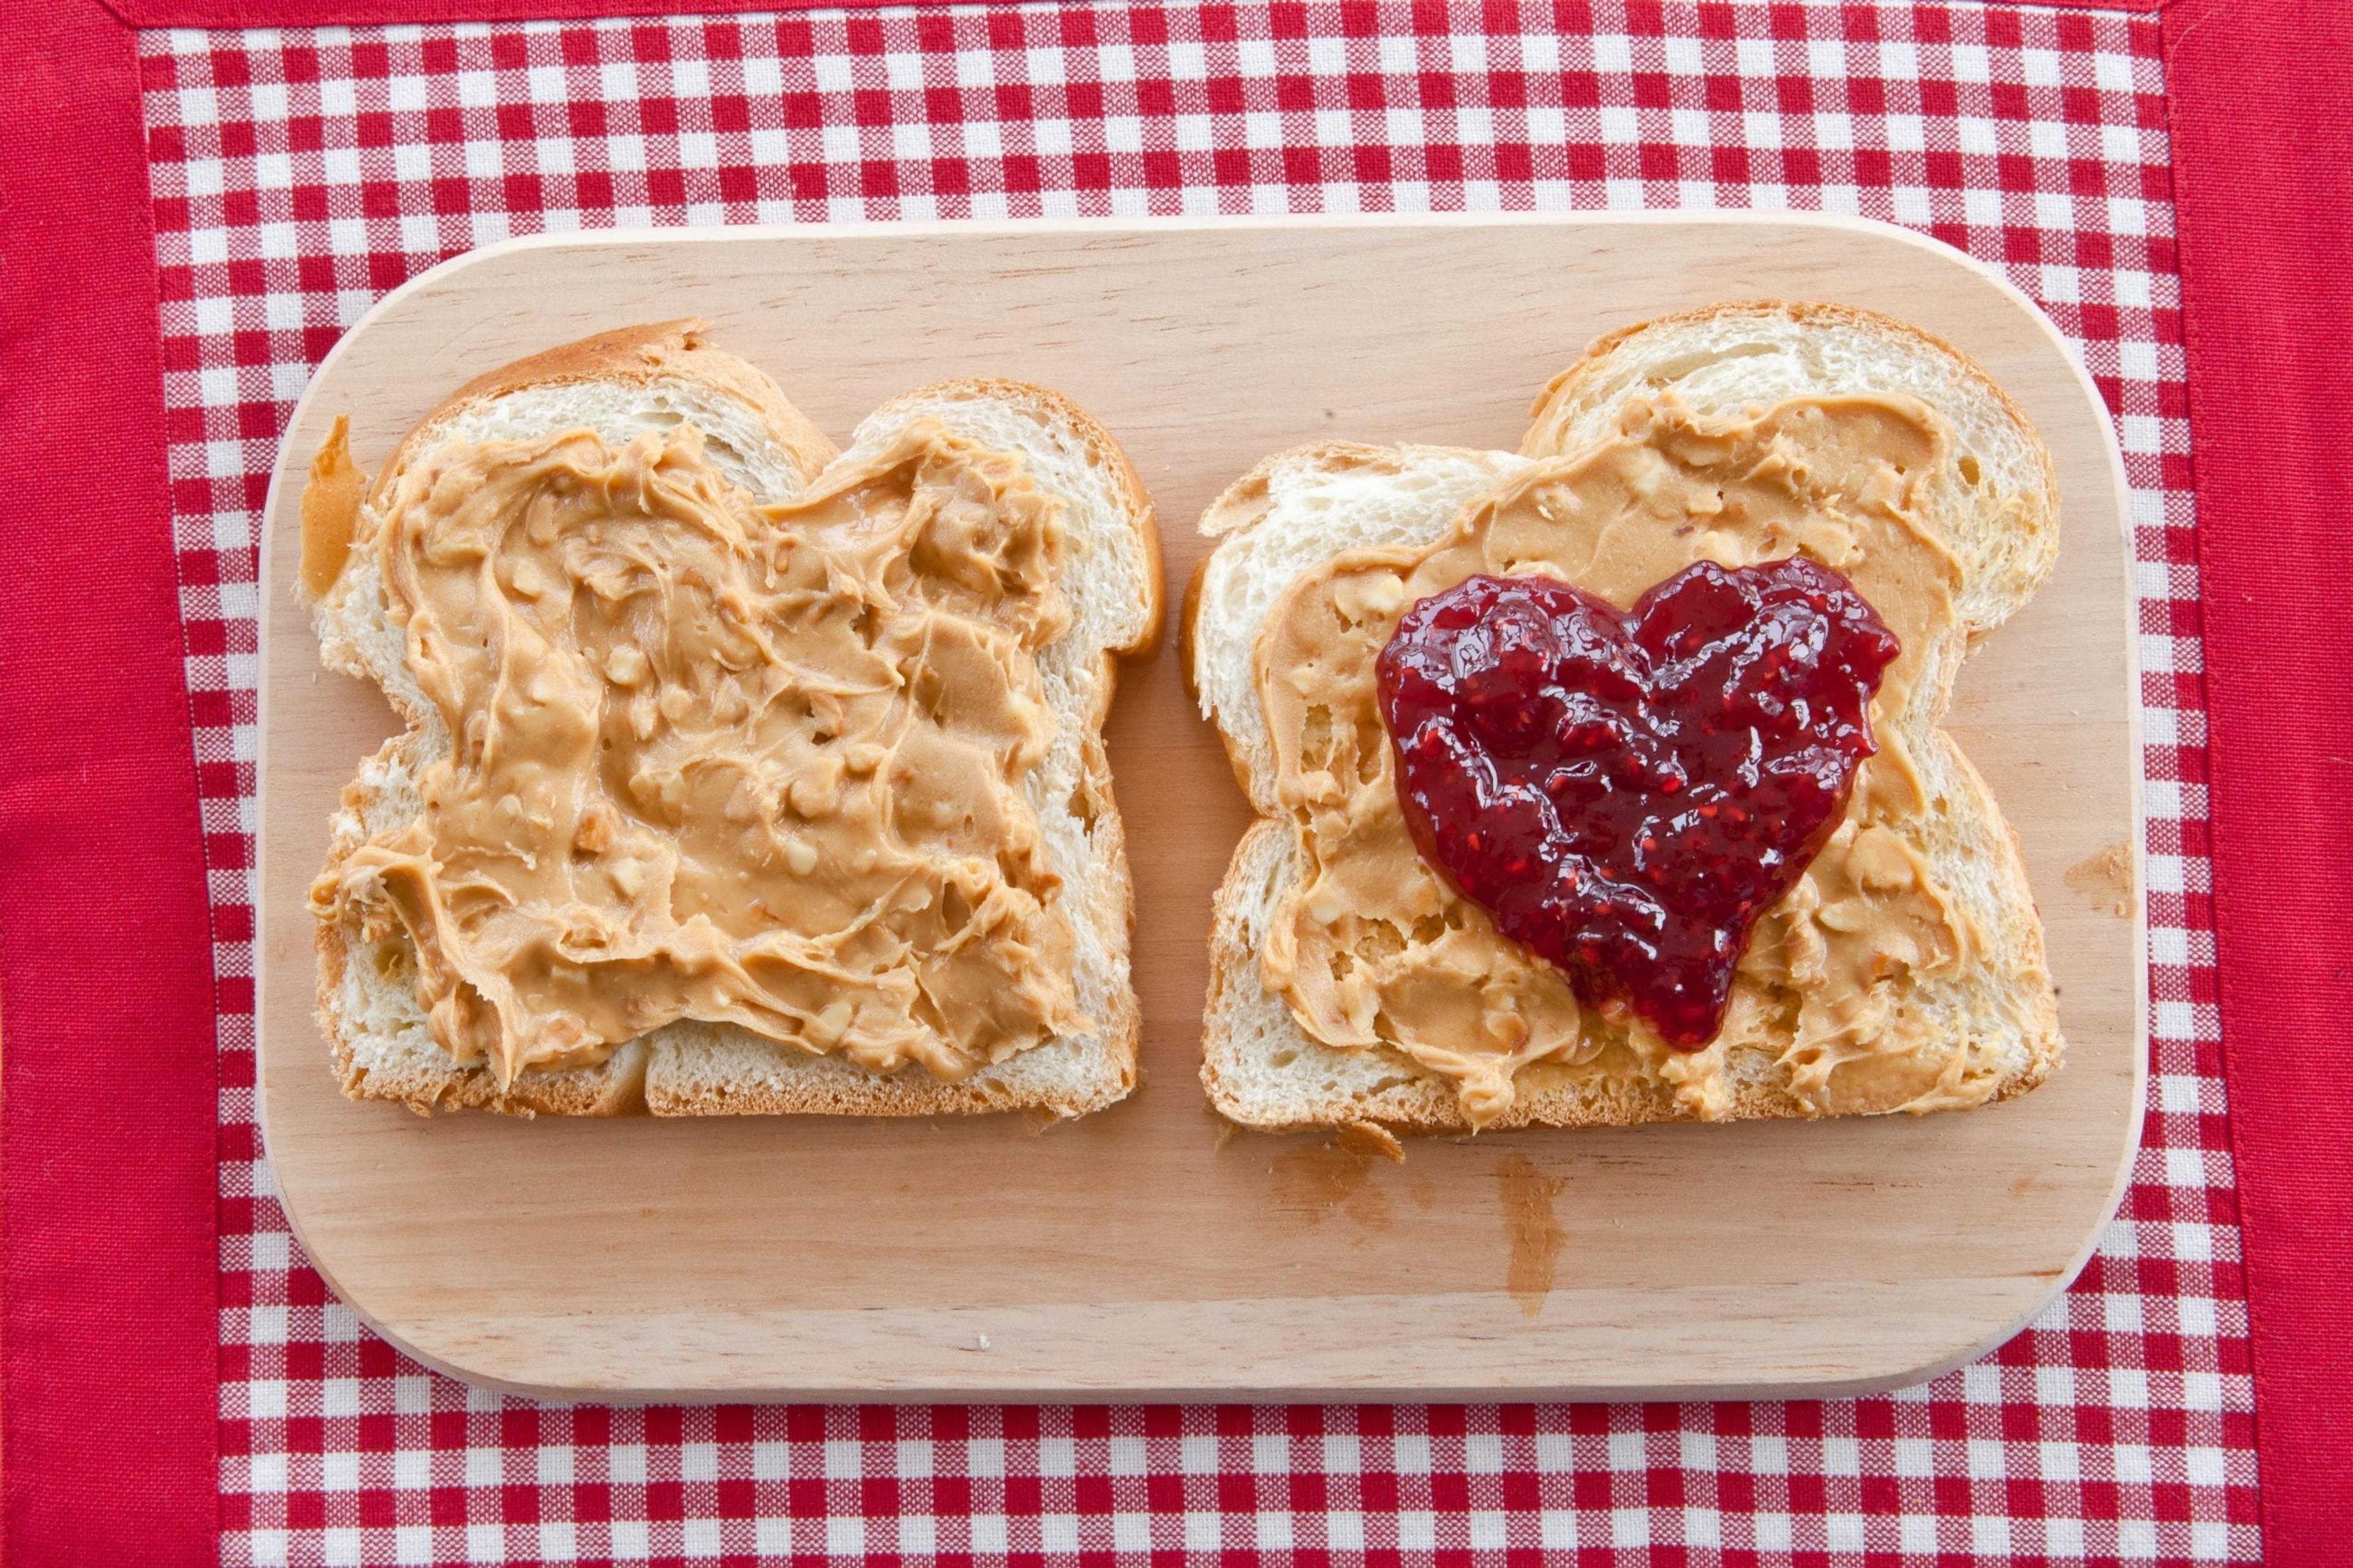 Bread spread with peanut butter and jelly in the shape of a heart.